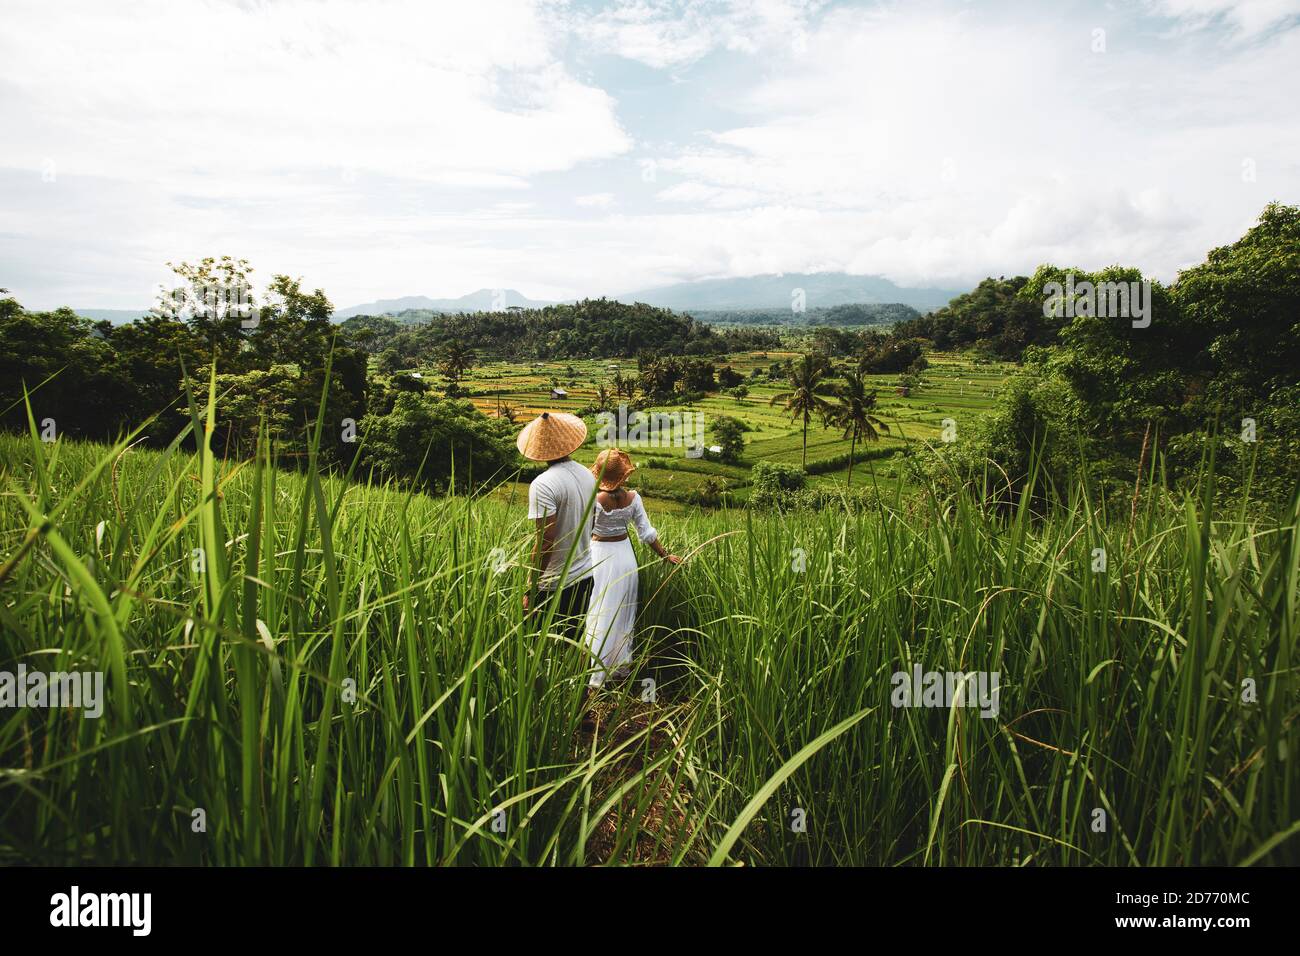 Holiday photograph couple walking in rice field, hand-holding couple with Bali conical hat Stock Photo